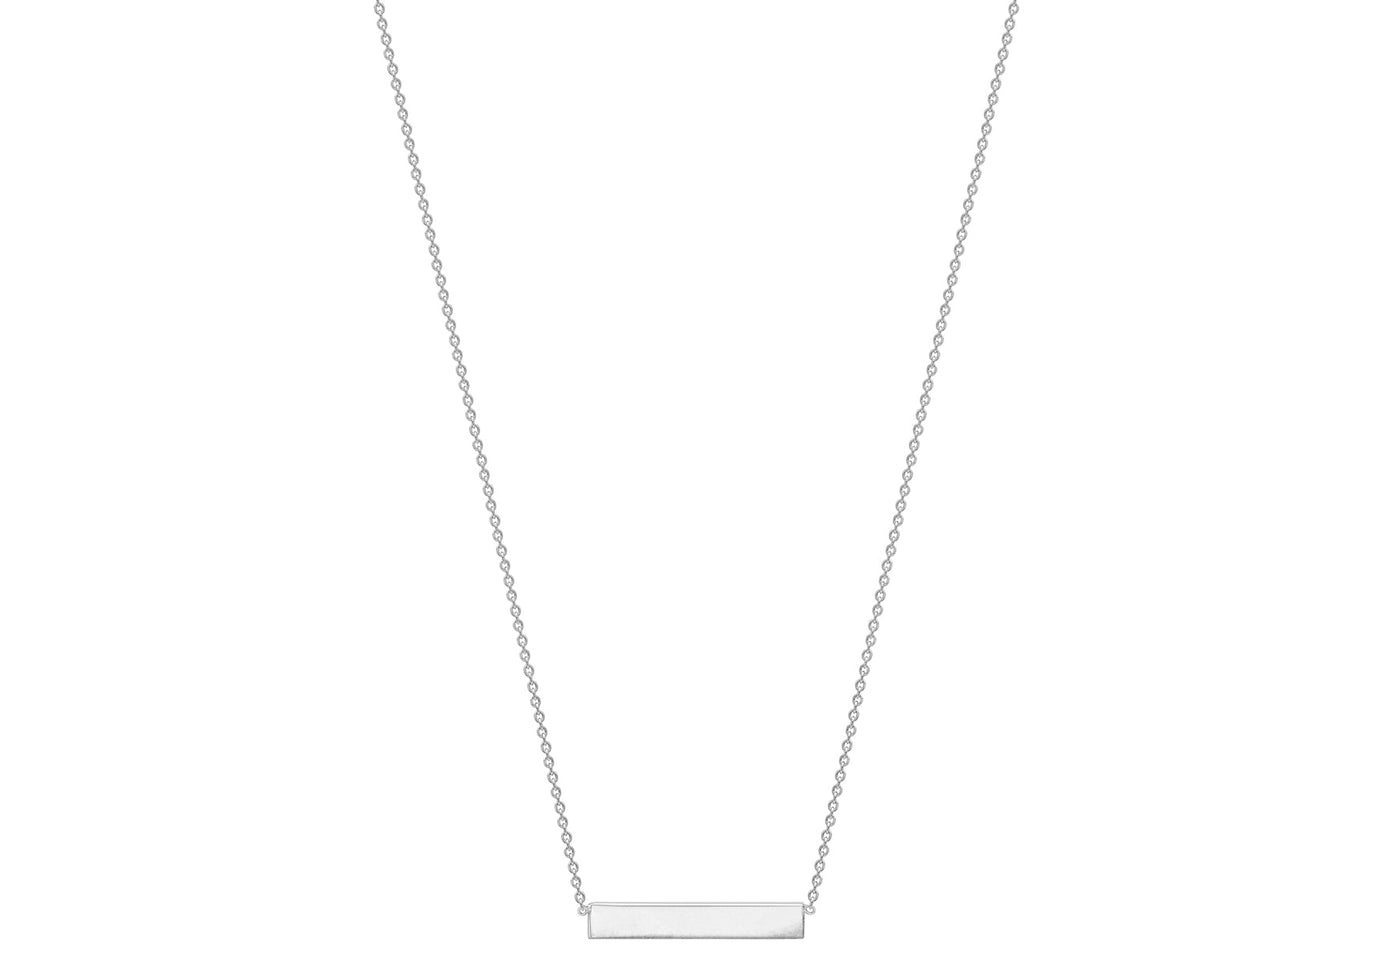 9K White Gold Solid Horizontal Bar Necklace 41+2cm